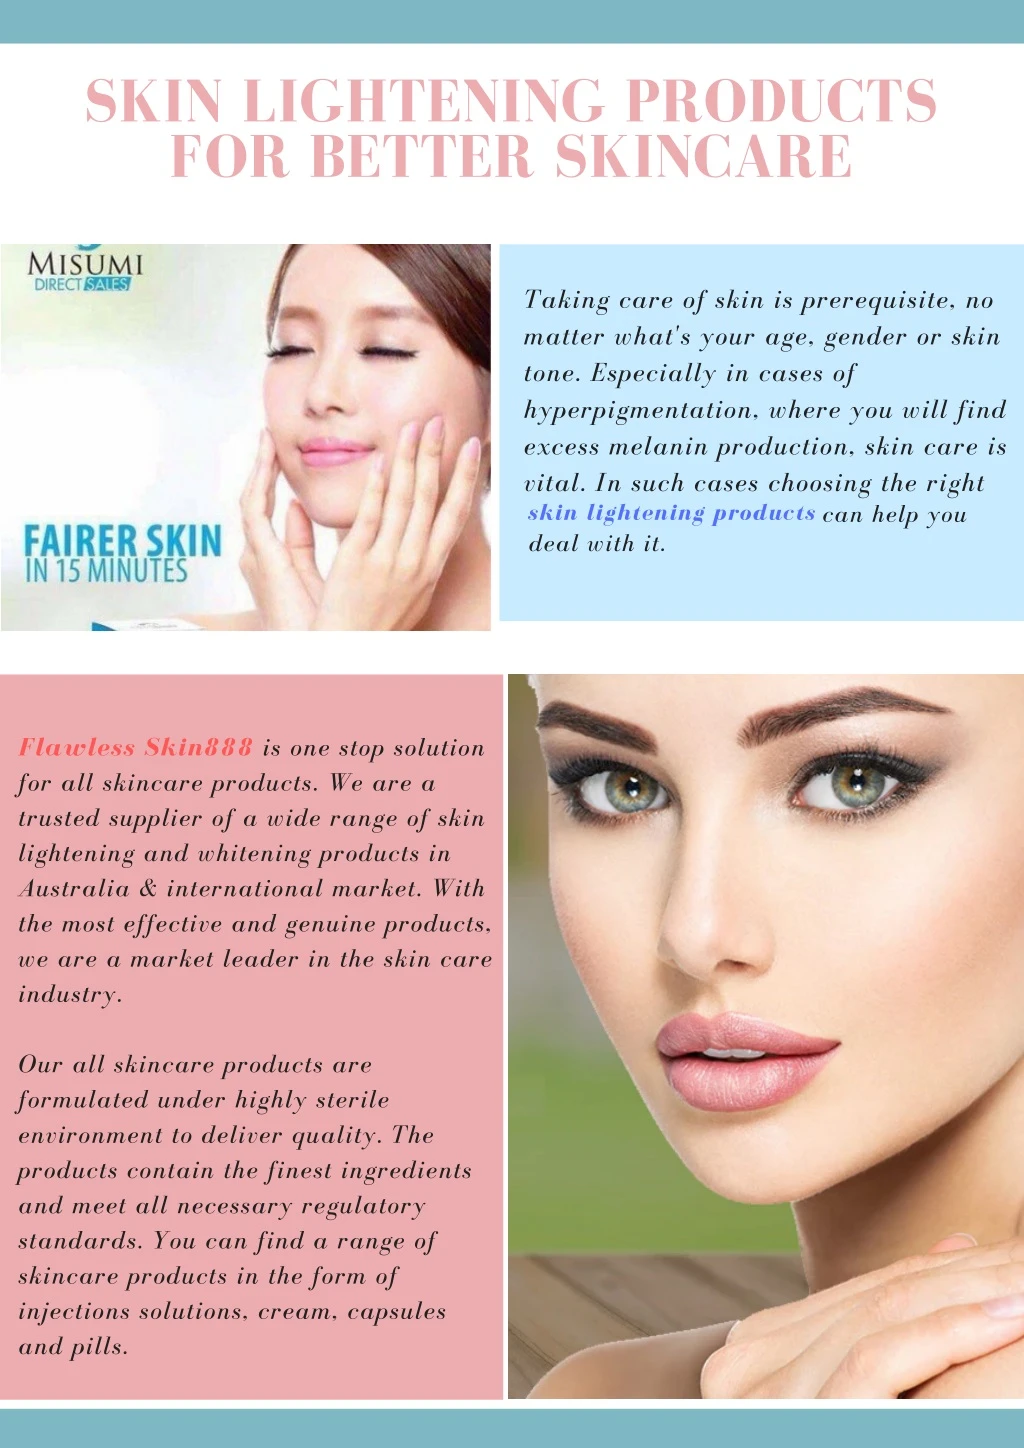 skin lightening products for better skincare